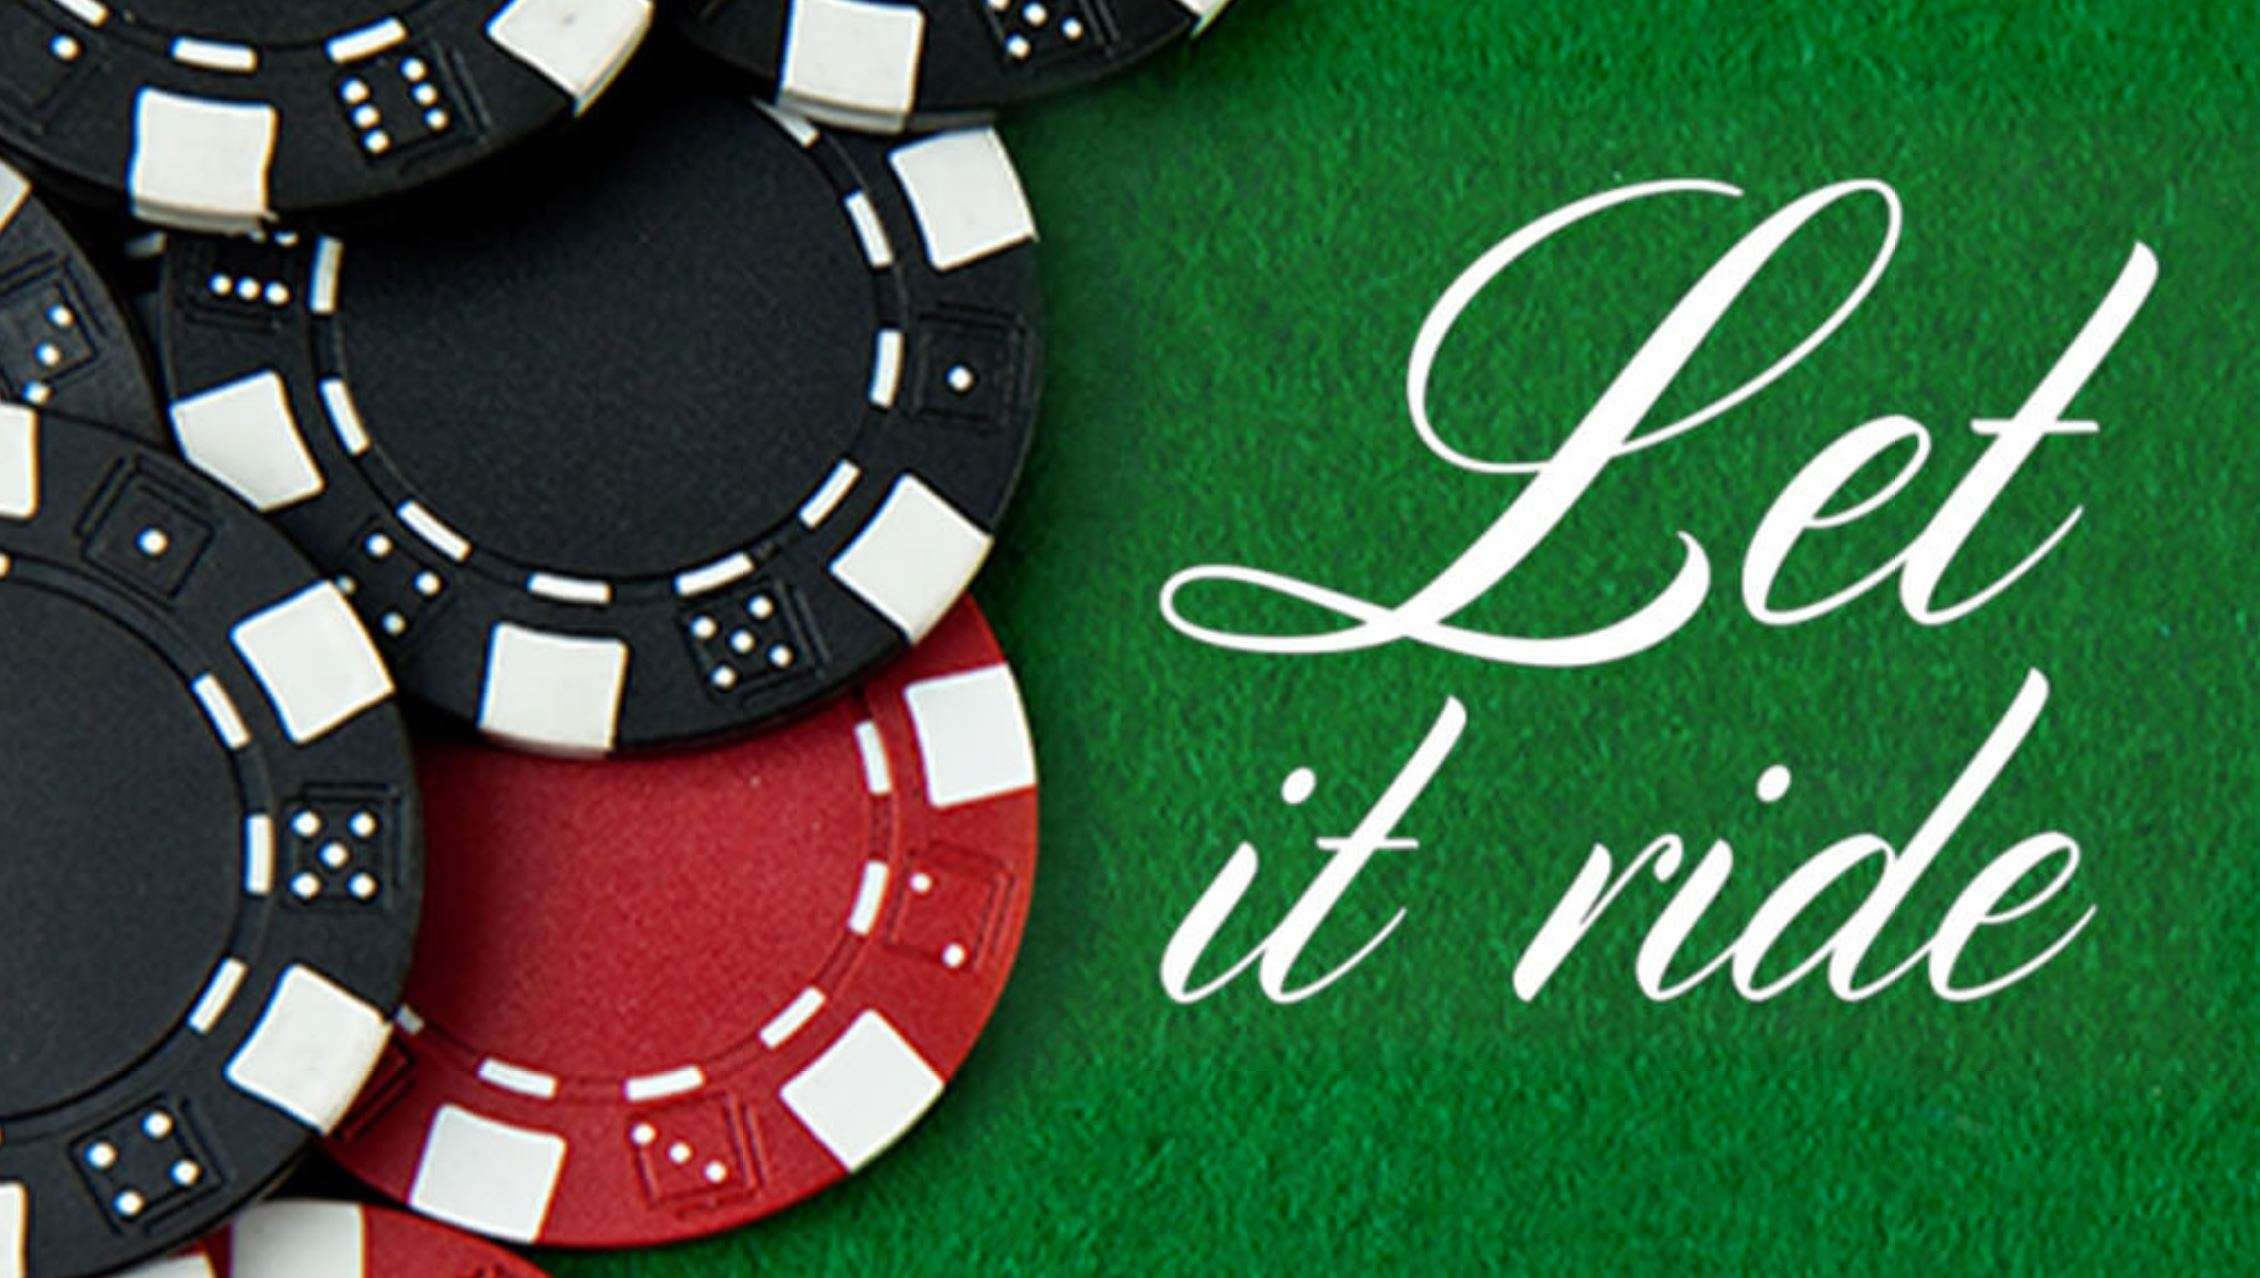 Let It Ride Poker – An Introduction to the Popular Online Game